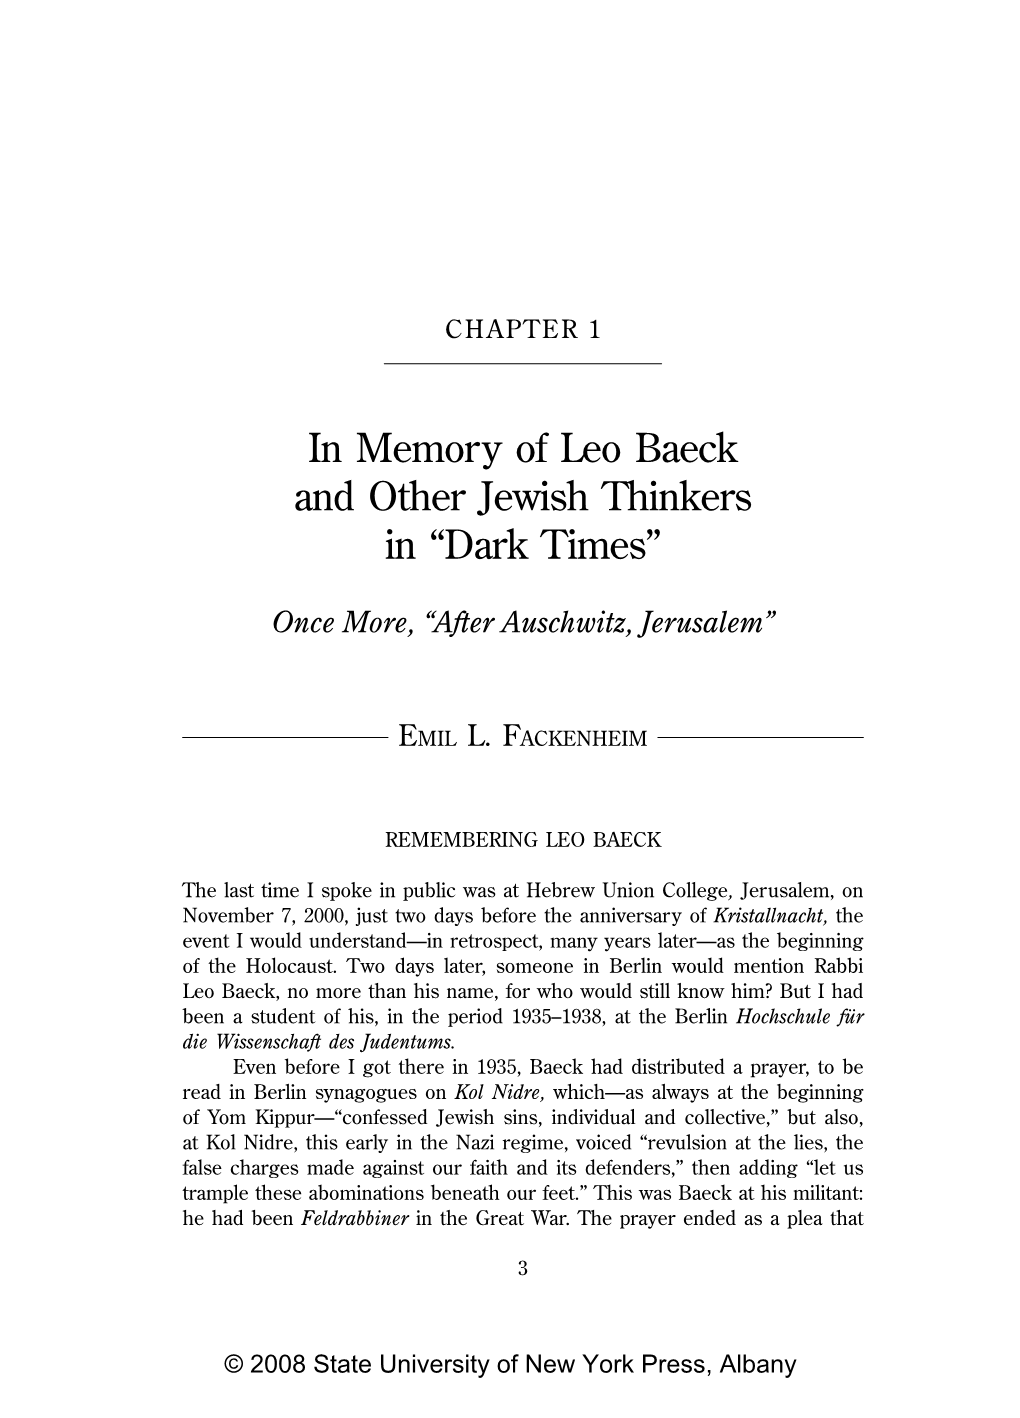 In Memory of Leo Baeck and Other Jewish Thinkers in “Dark Times”